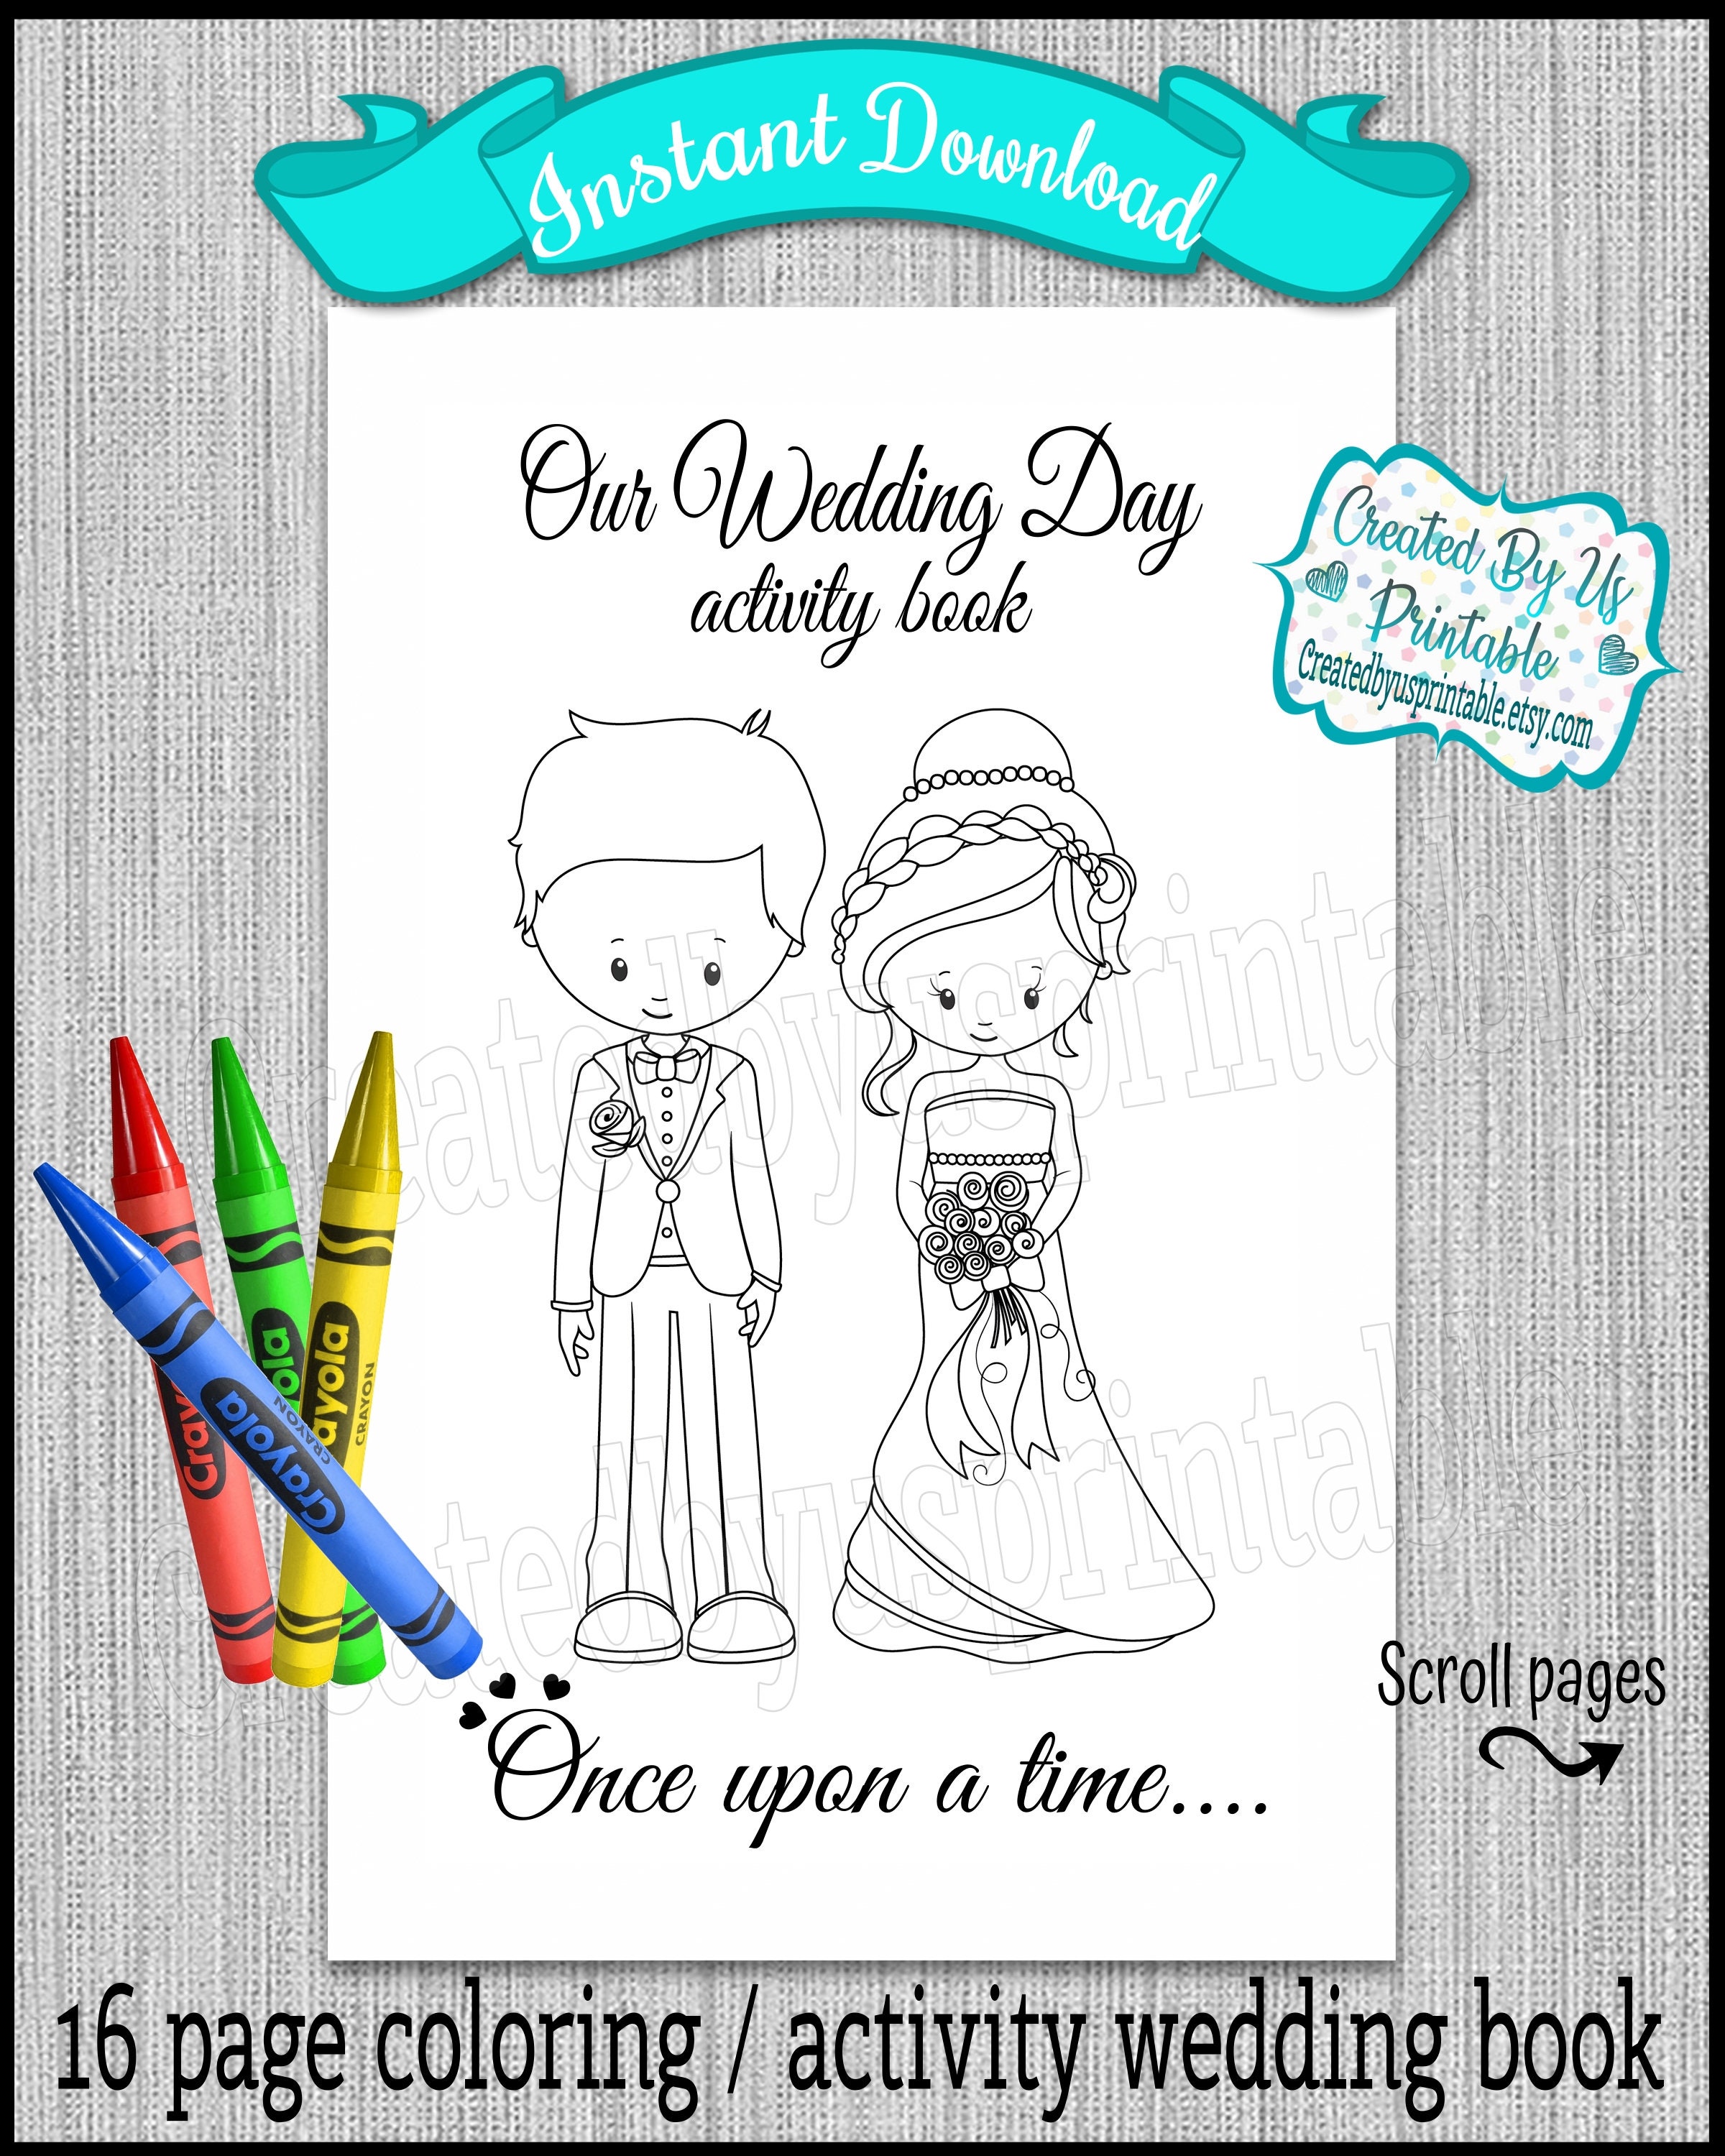 Download Instant Download Wedding Kids Activity Book 16 Page Coloring Etsy